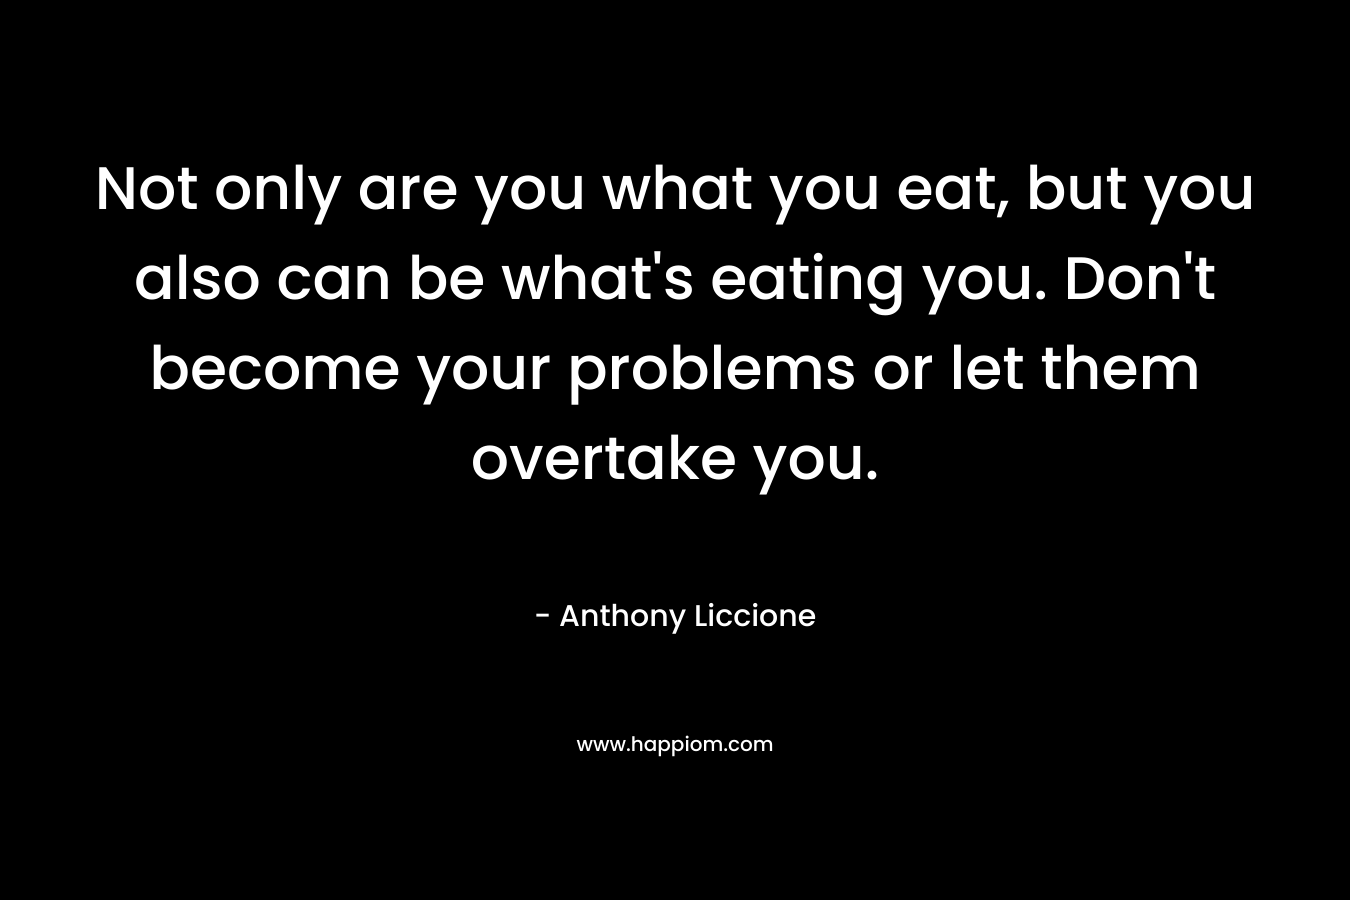 Not only are you what you eat, but you also can be what's eating you. Don't become your problems or let them overtake you.